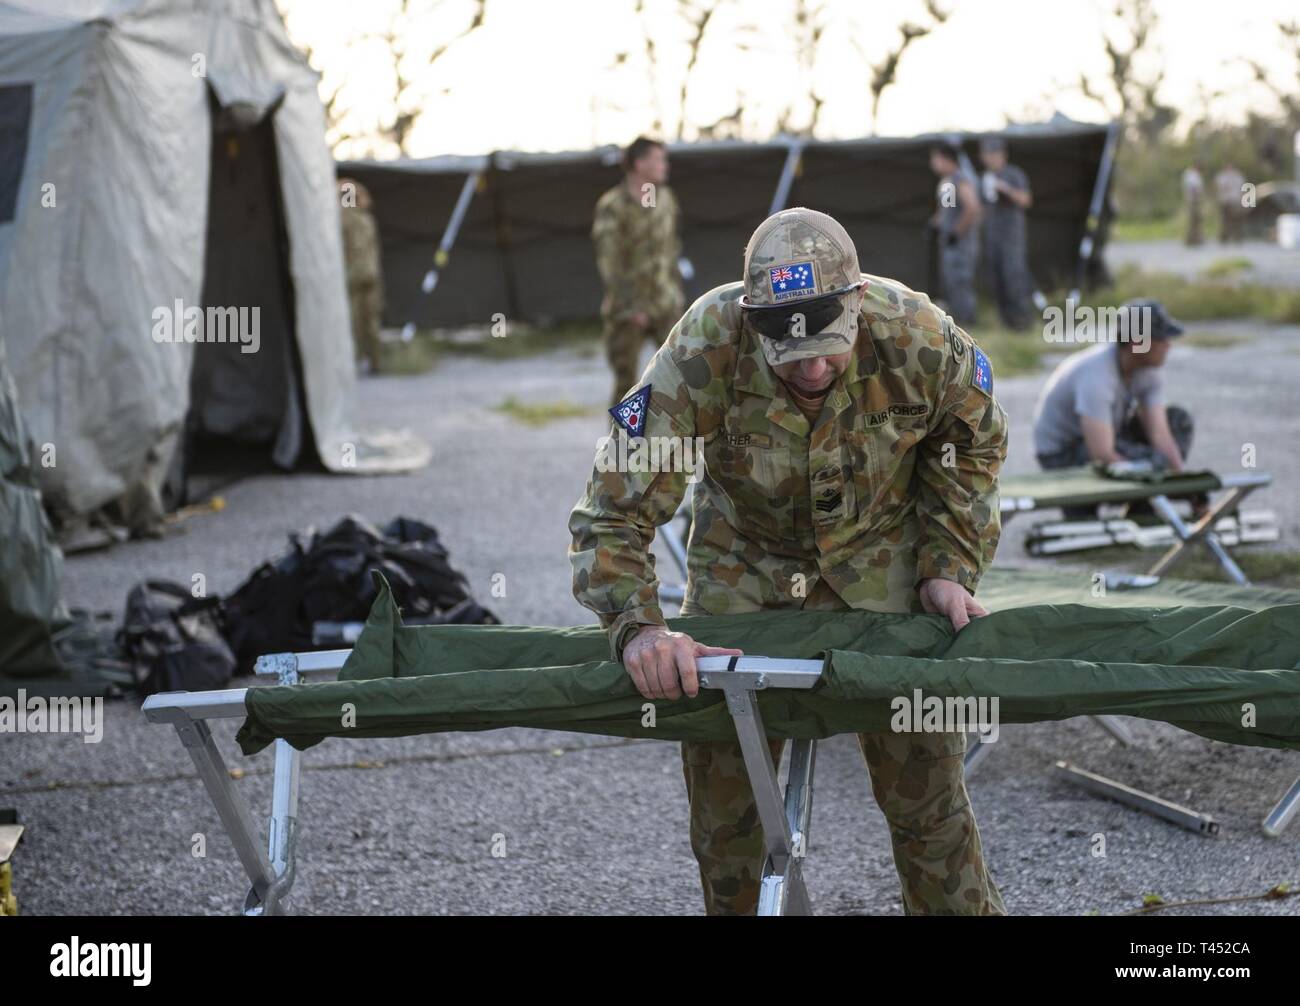 A Royal Australian Air Force member builds cot during exercise Cope North 19 in Tinian, U.S. Commonwealth of the Northern Marianas Islands Feb 26, 2019. Cope North is an annual multilateral U.S. Pacific Air Forces-sponsored field training exercise focused on combat air forces large-force employment and mobility air forces humanitarian assistance and disaster relief training to enhance interoperability among U.S., Australian and Japanese forces. Stock Photo